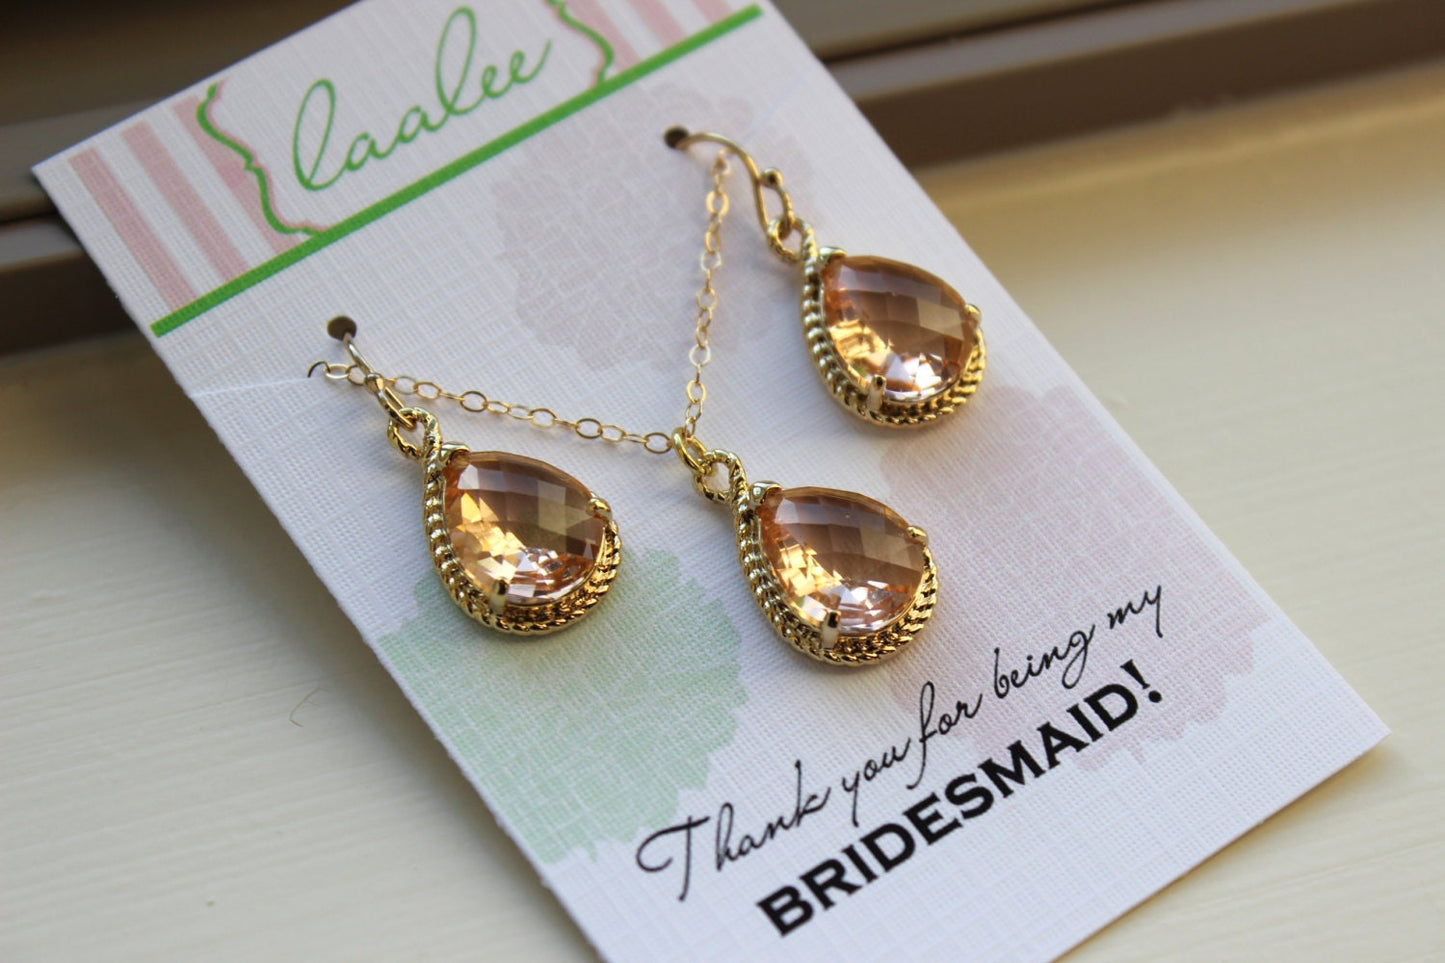 Gold Blush Jewelry Set Blush Bridesmaid Earrings Wedding Jewelry, Champagne Wedding, Bridesmaid Gift for Her, Pink Necklace, Bridesmaid Card